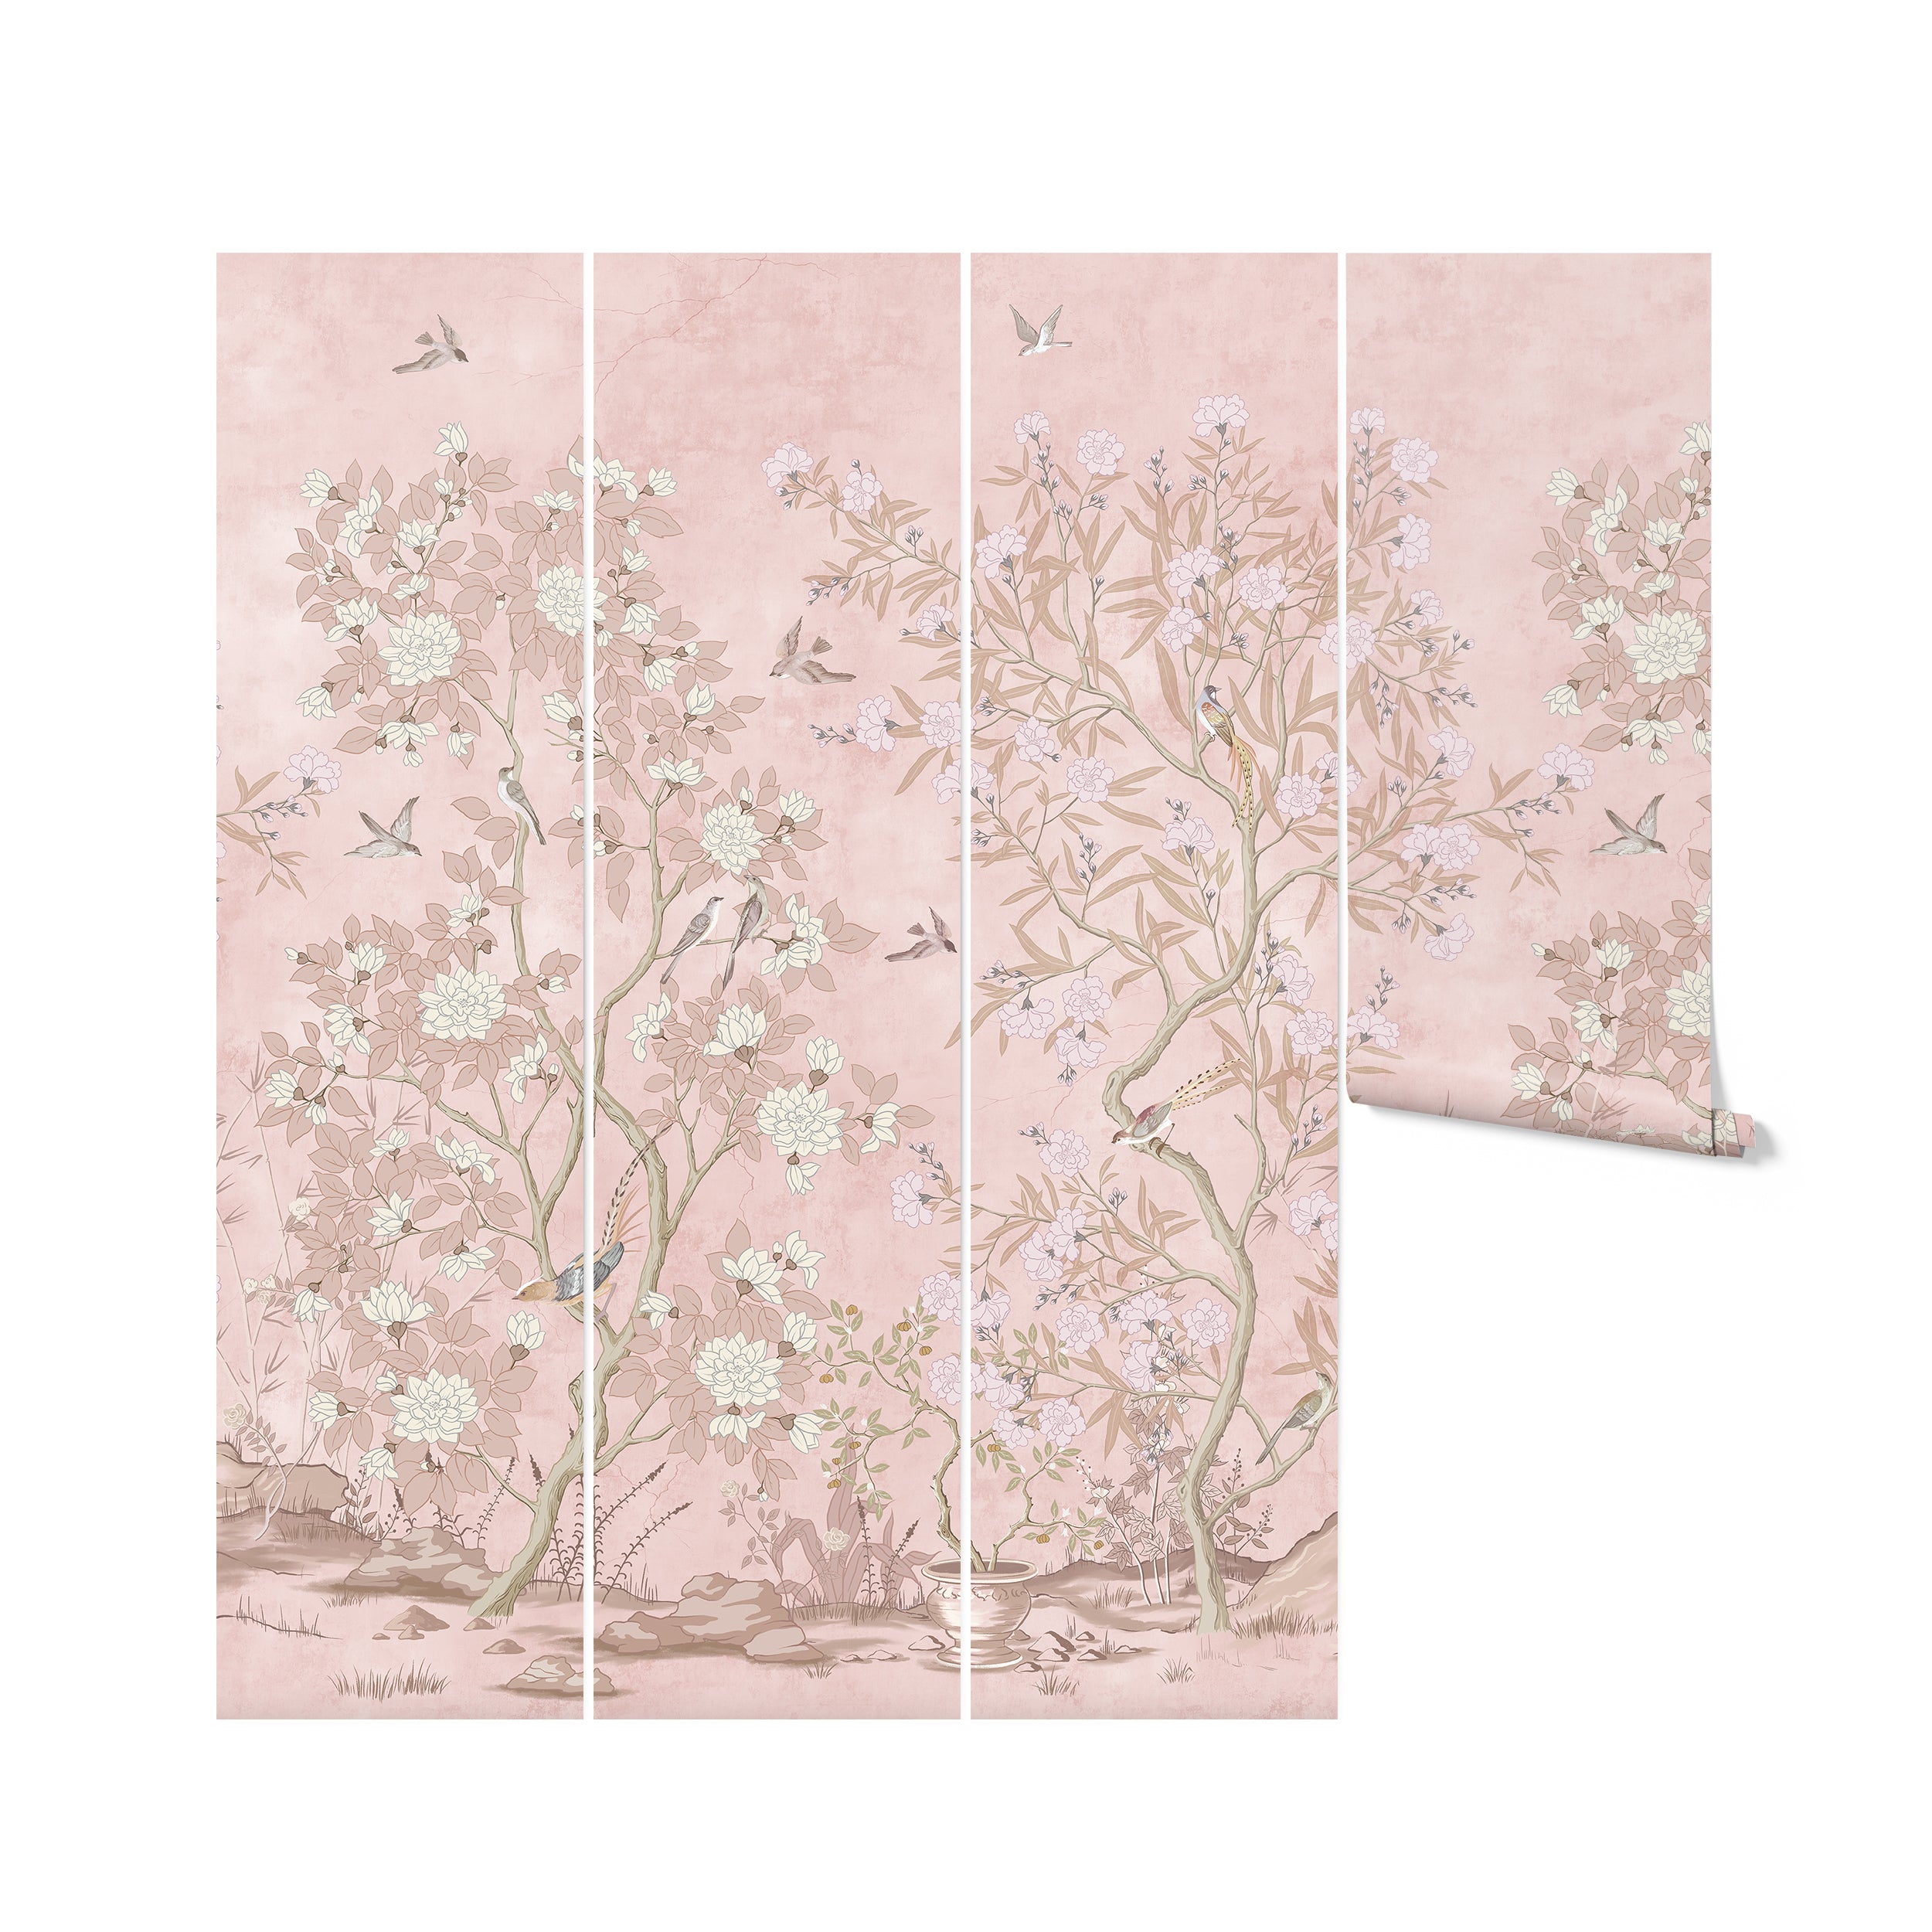 A visual display of chinoiserie wallpaper rolls, illustrating the continuity of the pattern with slender trees, varied bird species, and detailed flowers in a muted palette on a blush pink backdrop, designed to create a seamless, expansive mural when installed side by side